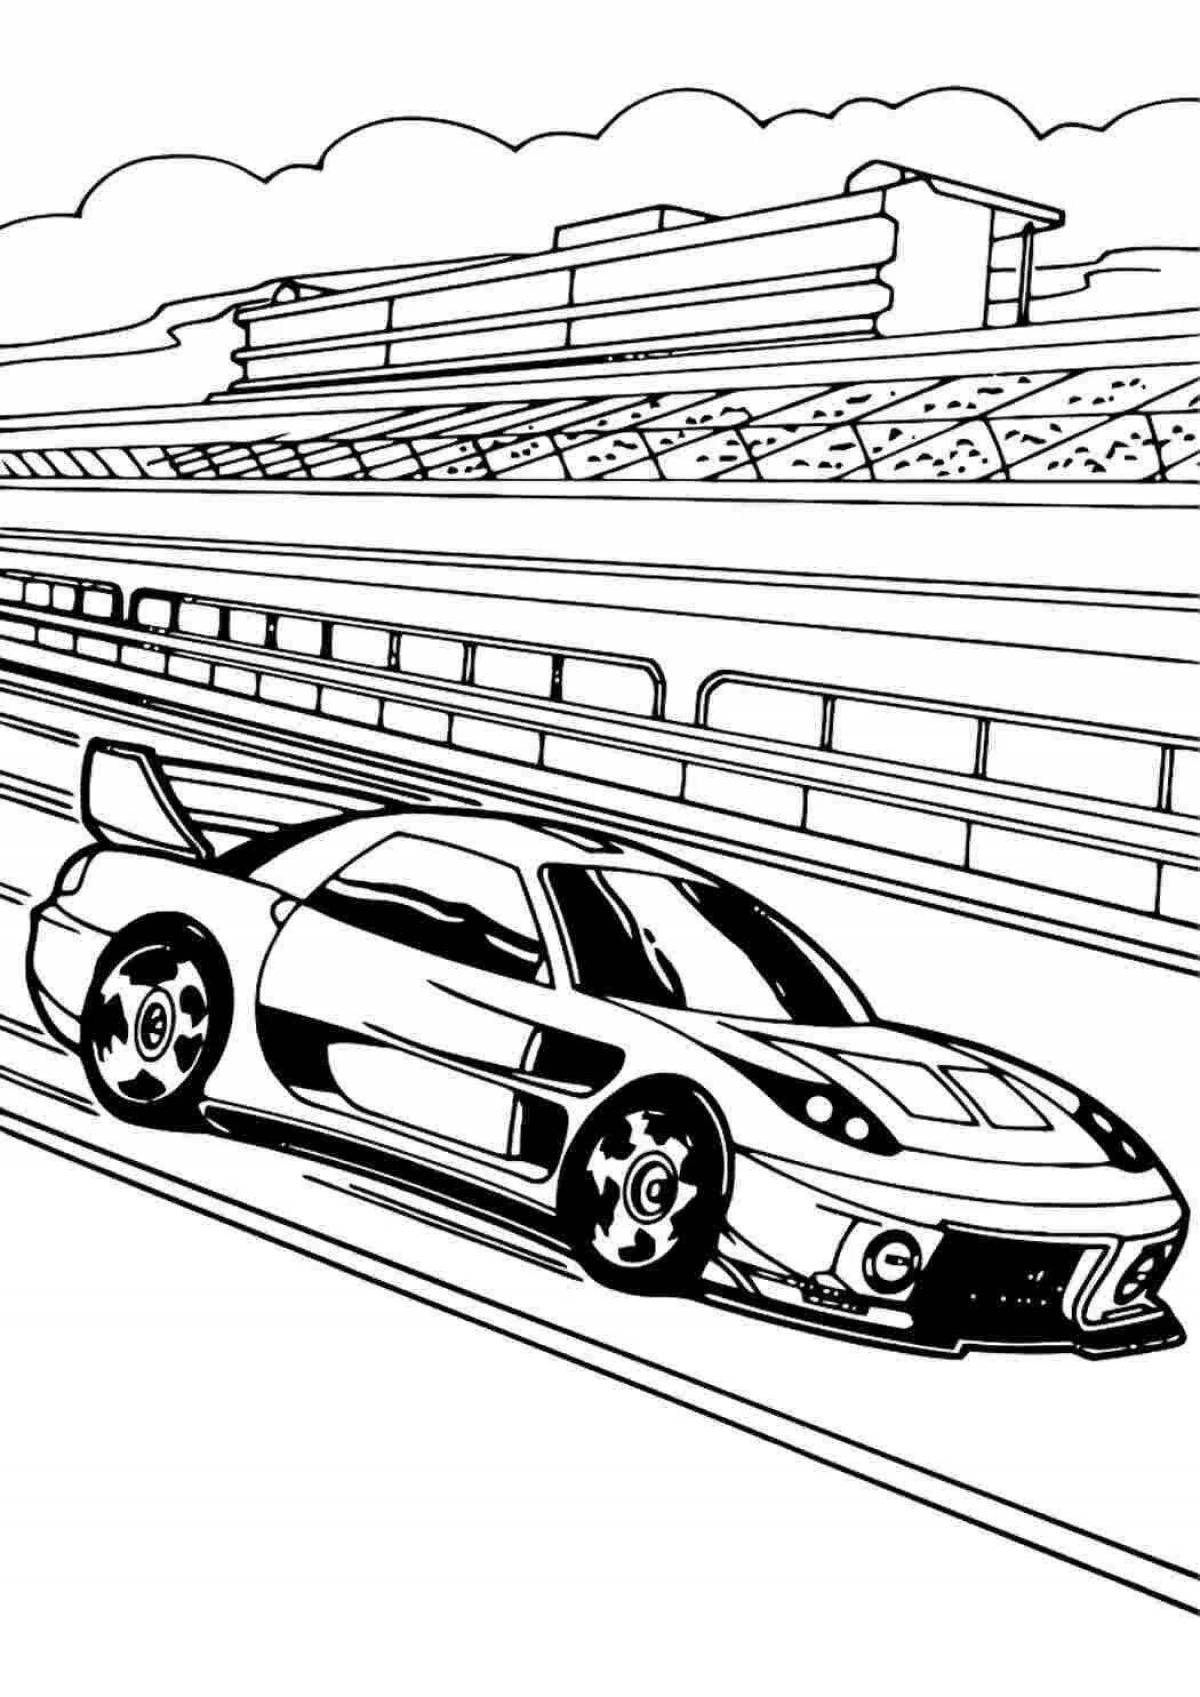 Dazzling hot wheels coloring pages for kids